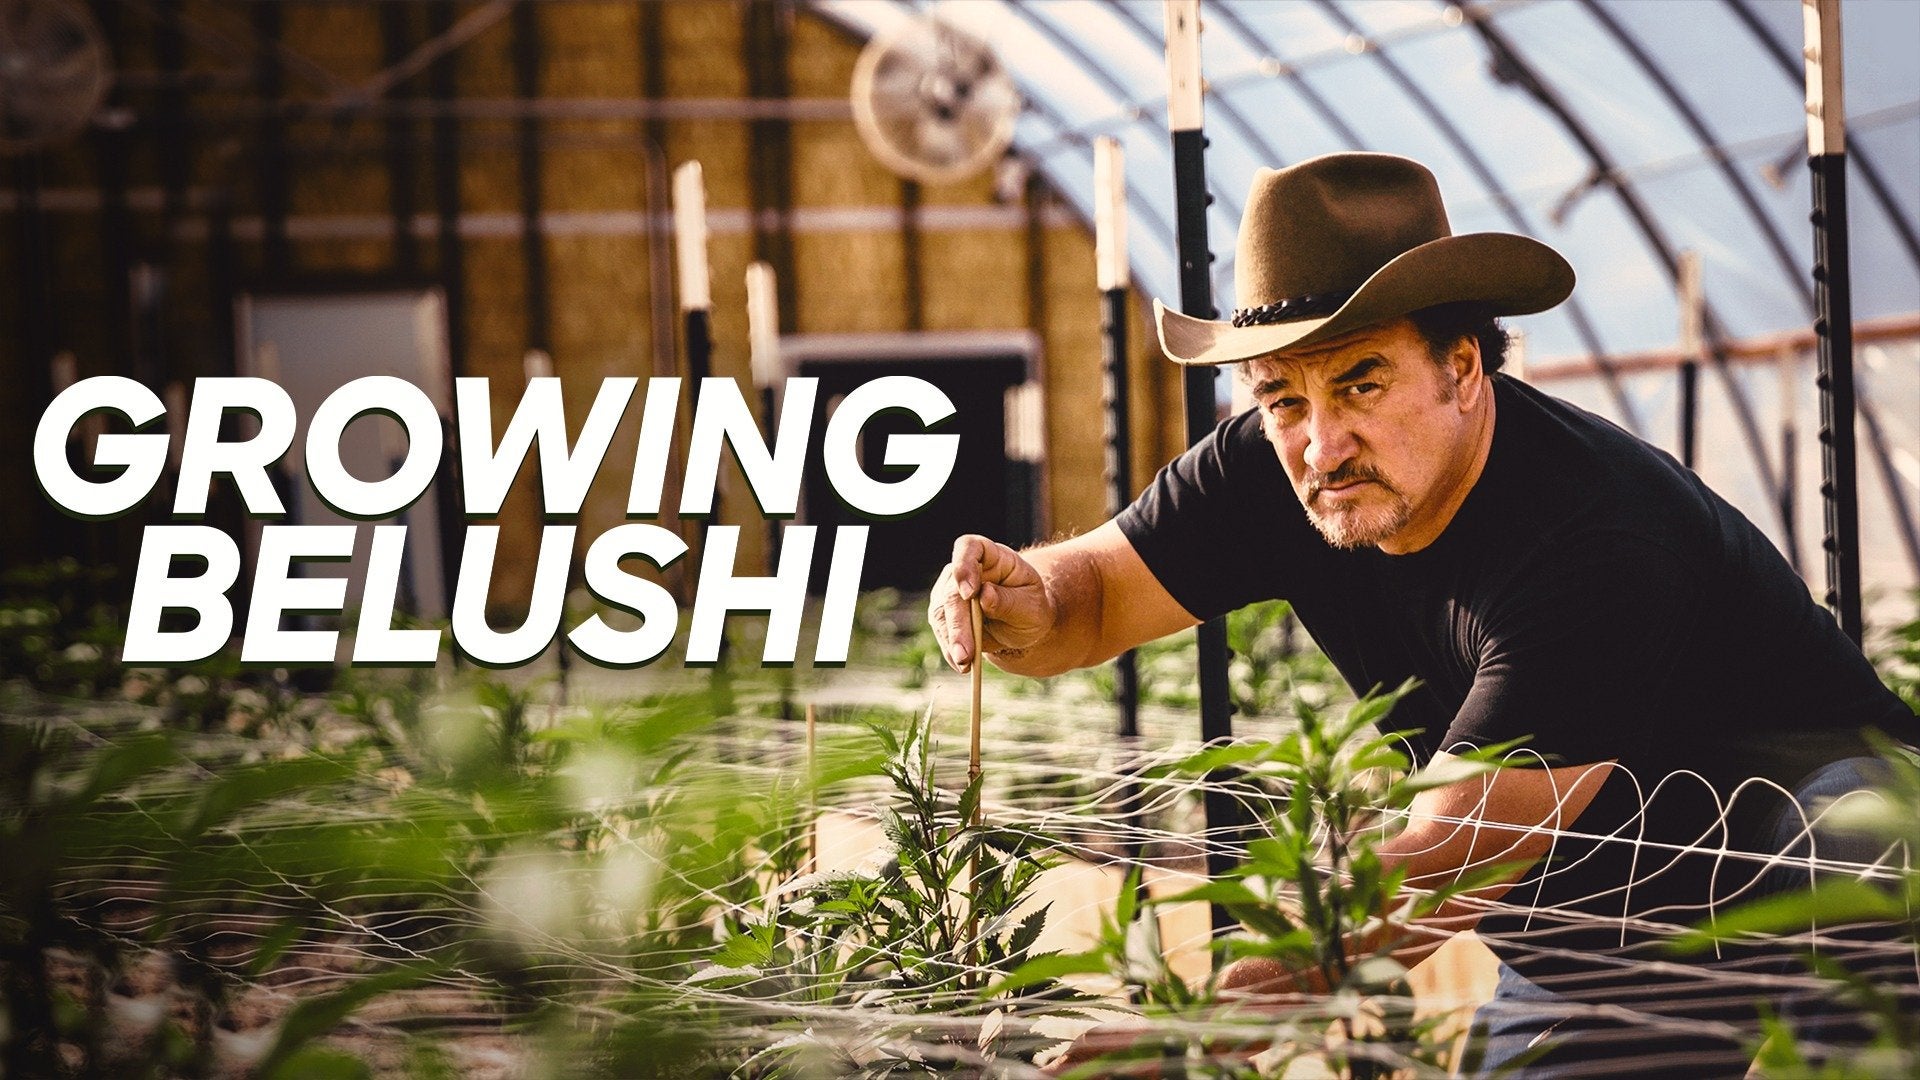 Growing Belushi S01E03 720p  The Weed Brothers